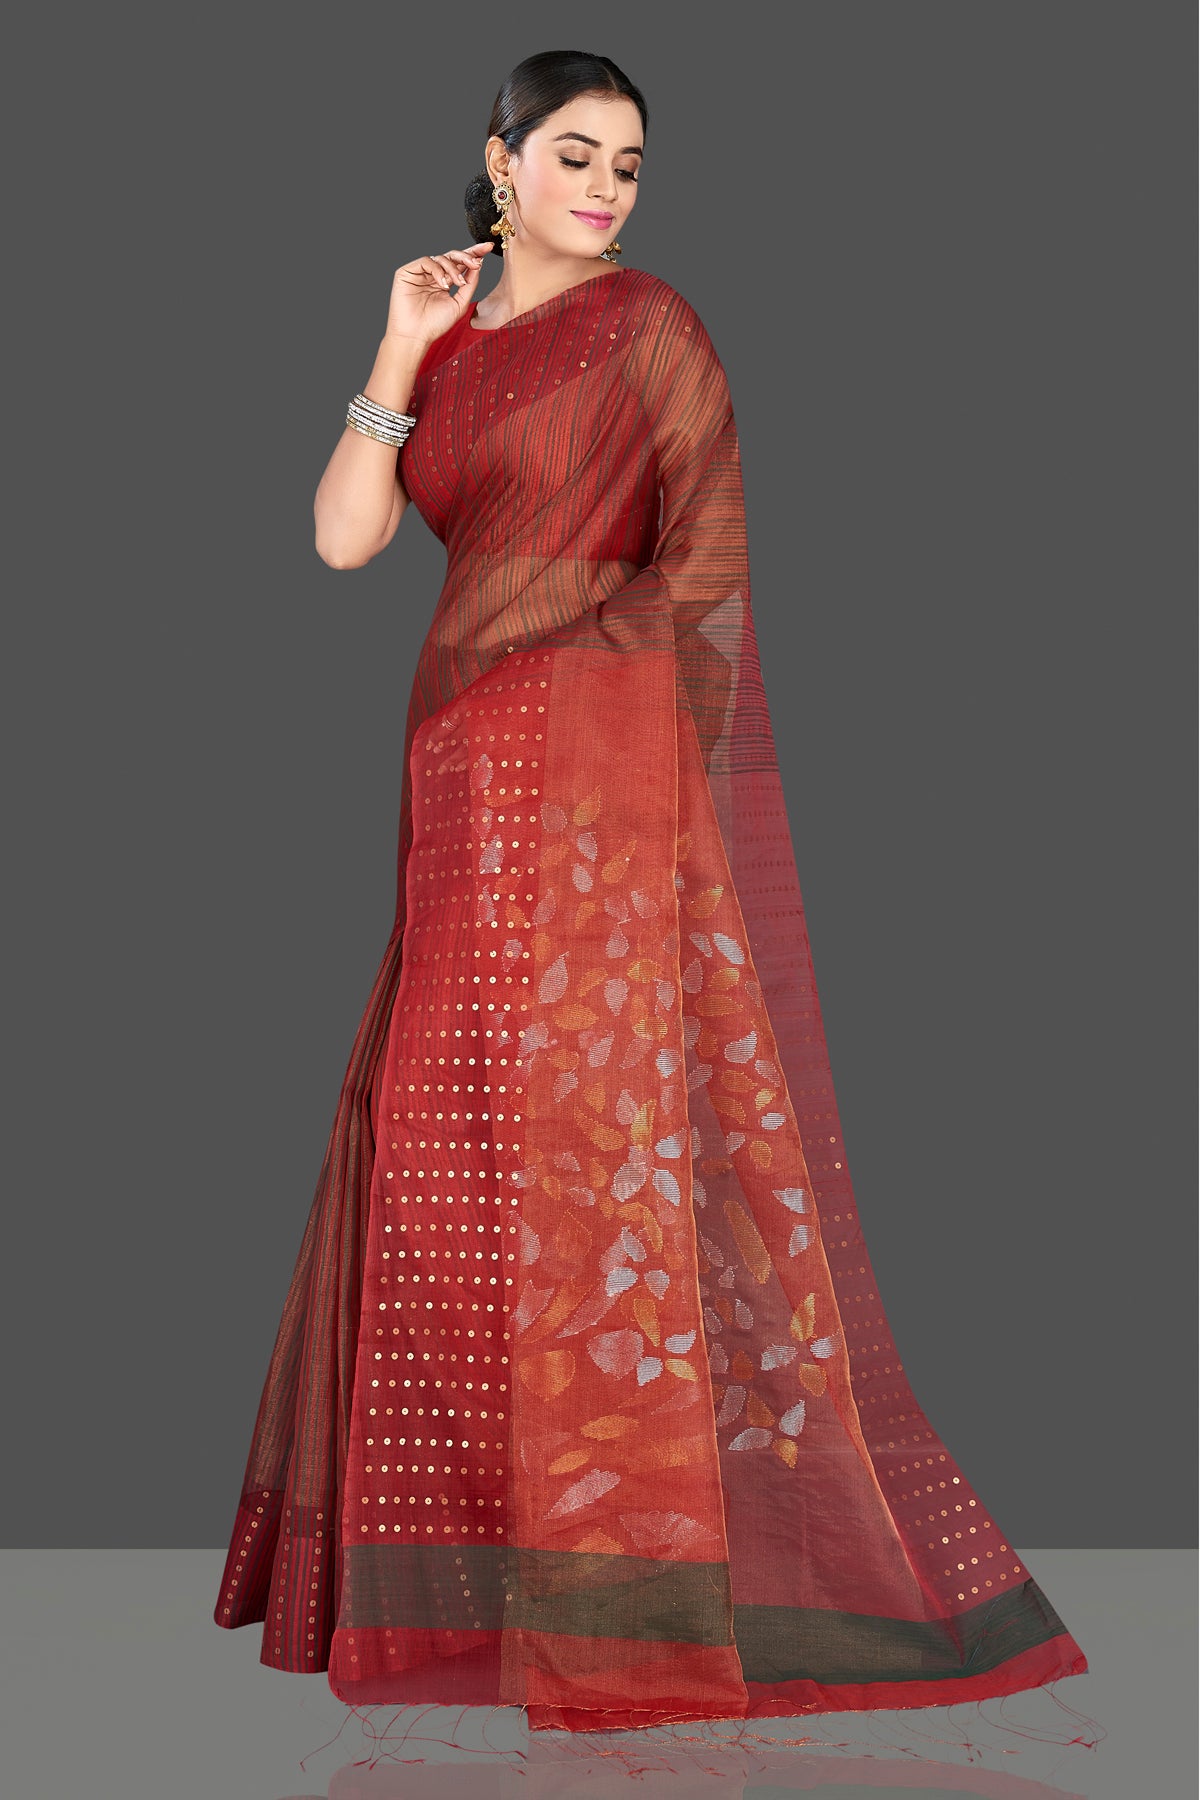 Shop stunning maroon muslin Jamdani saree online in USA with sequin border. Radiate traditional elegance on festive occasions in beautiful handloom silk sarees, paithani sarees, Lucknowi sarees, embroidered sarees from Pure Elegance Indian saree store in USA.-pallu